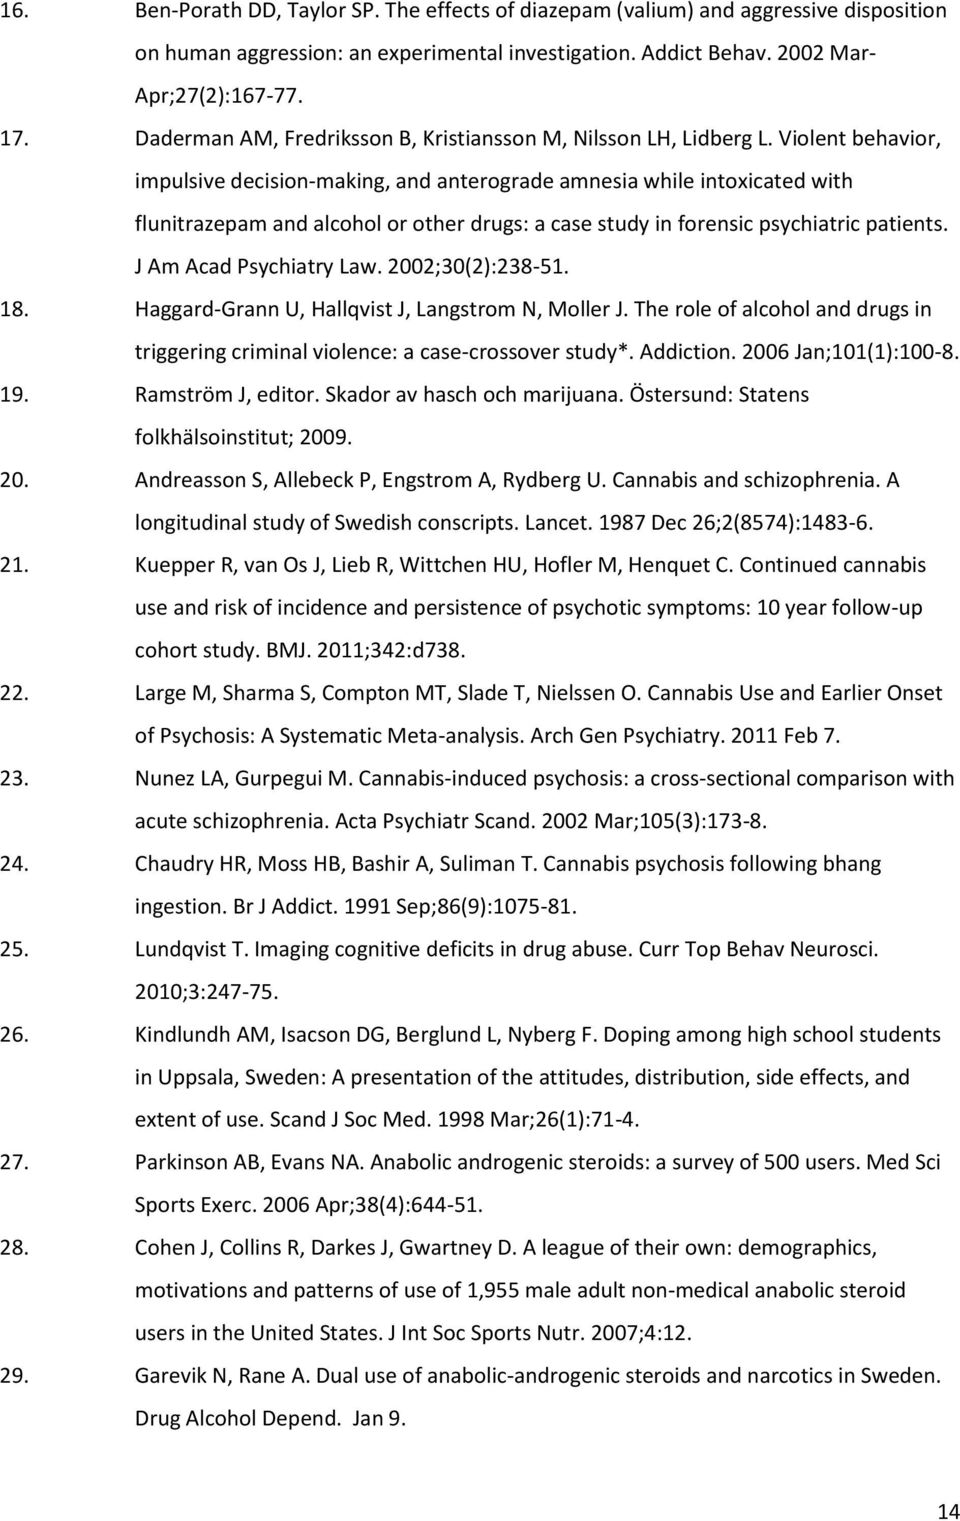 Violent behavior, impulsive decision-making, and anterograde amnesia while intoxicated with flunitrazepam and alcohol or other drugs: a case study in forensic psychiatric patients.